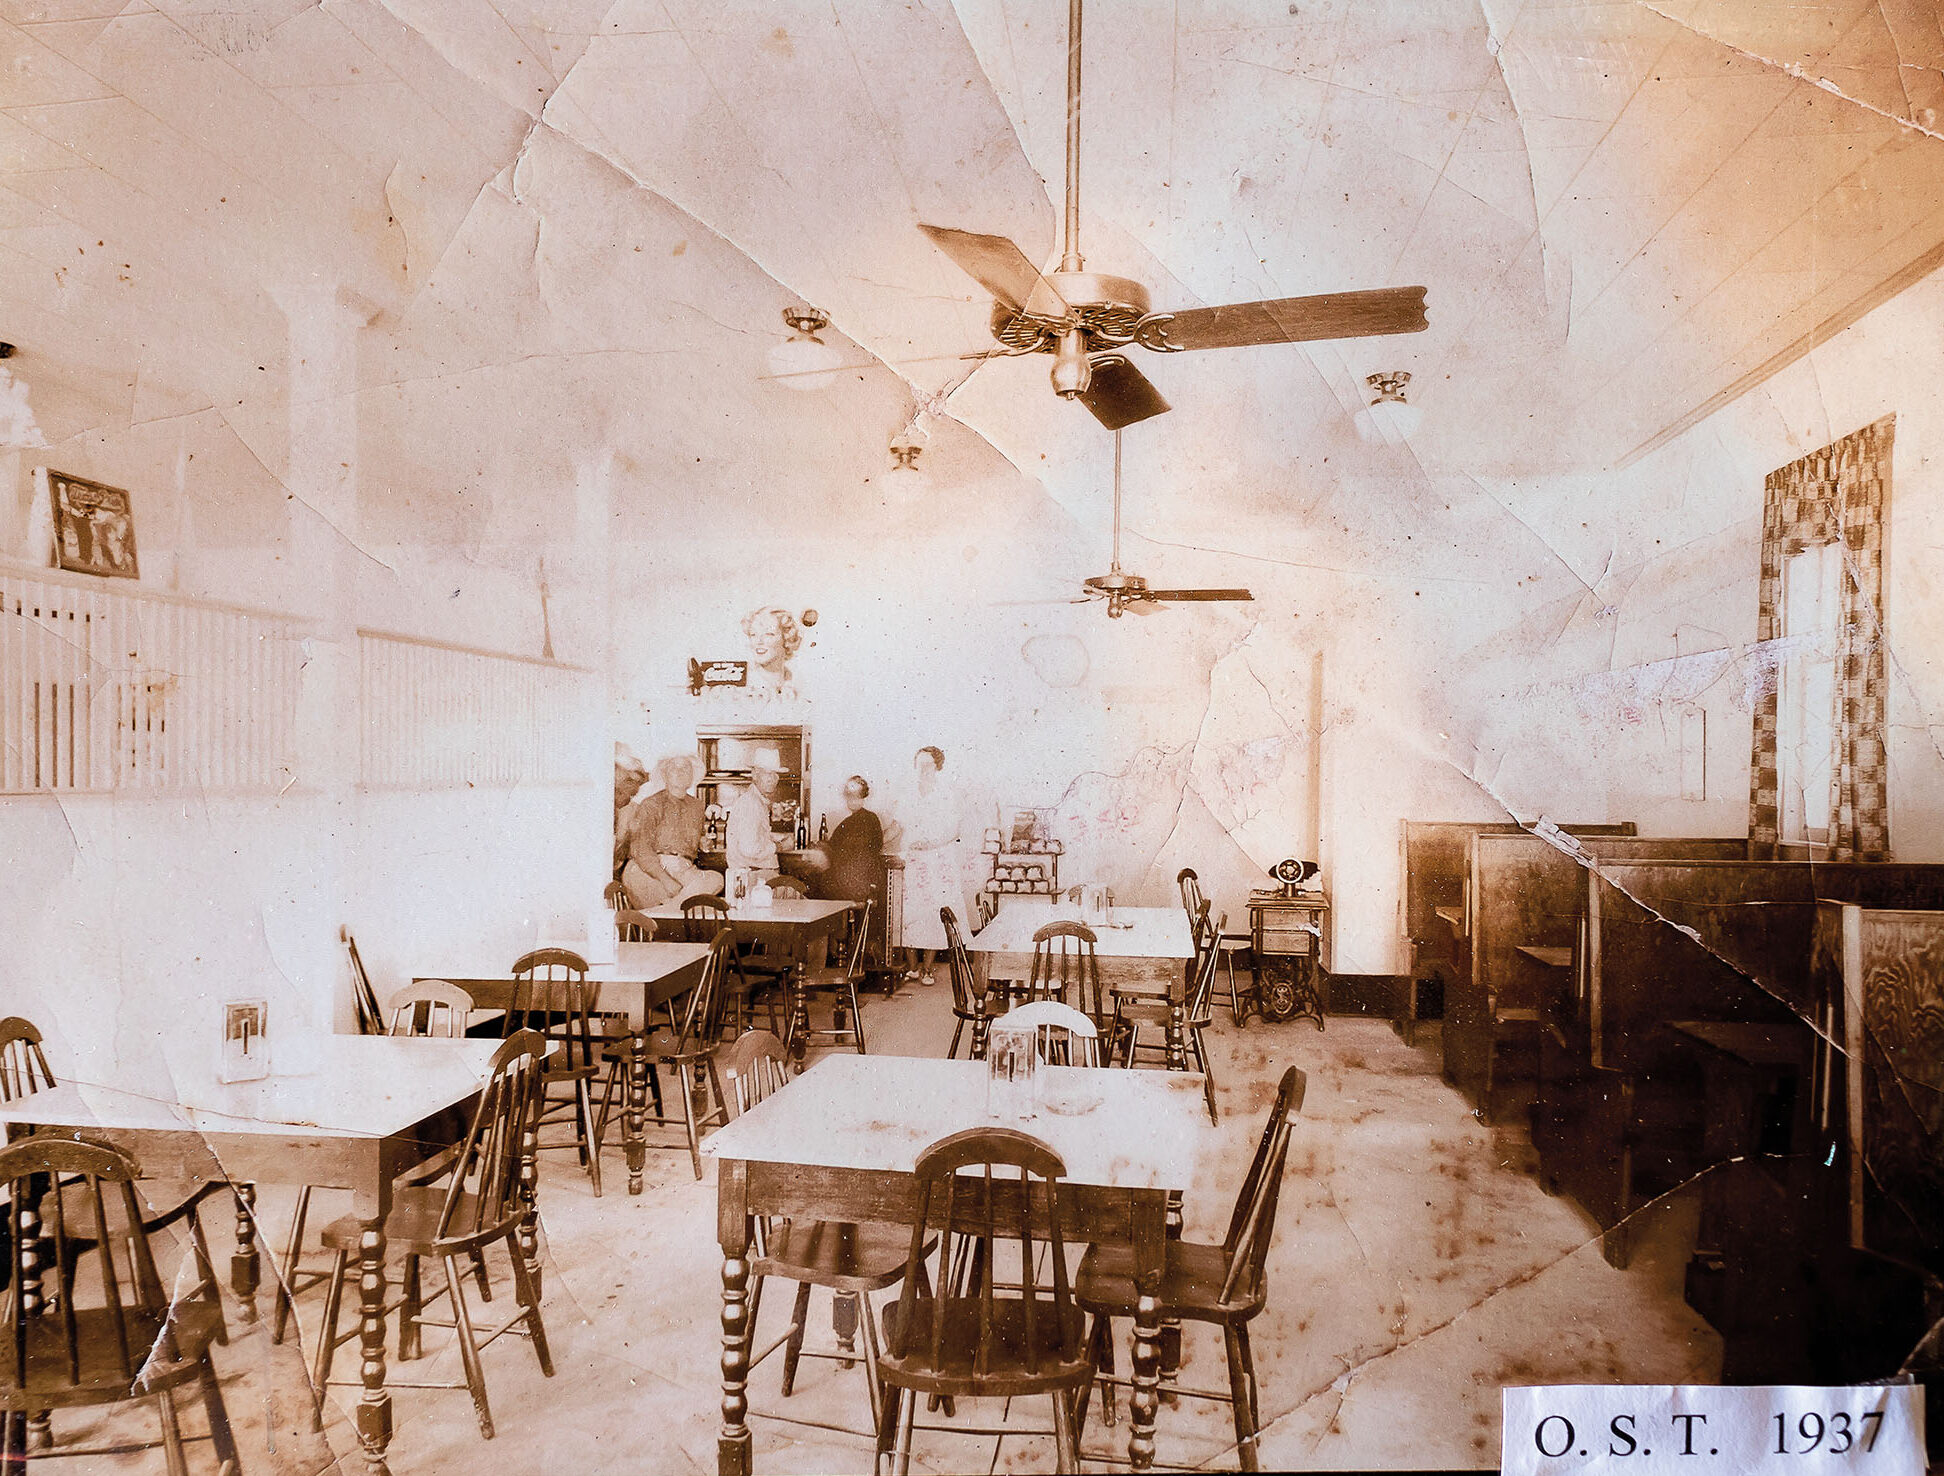 A sepia-tone historic photograph of the inside of a restaurant with ceiling fans, tables and chairs